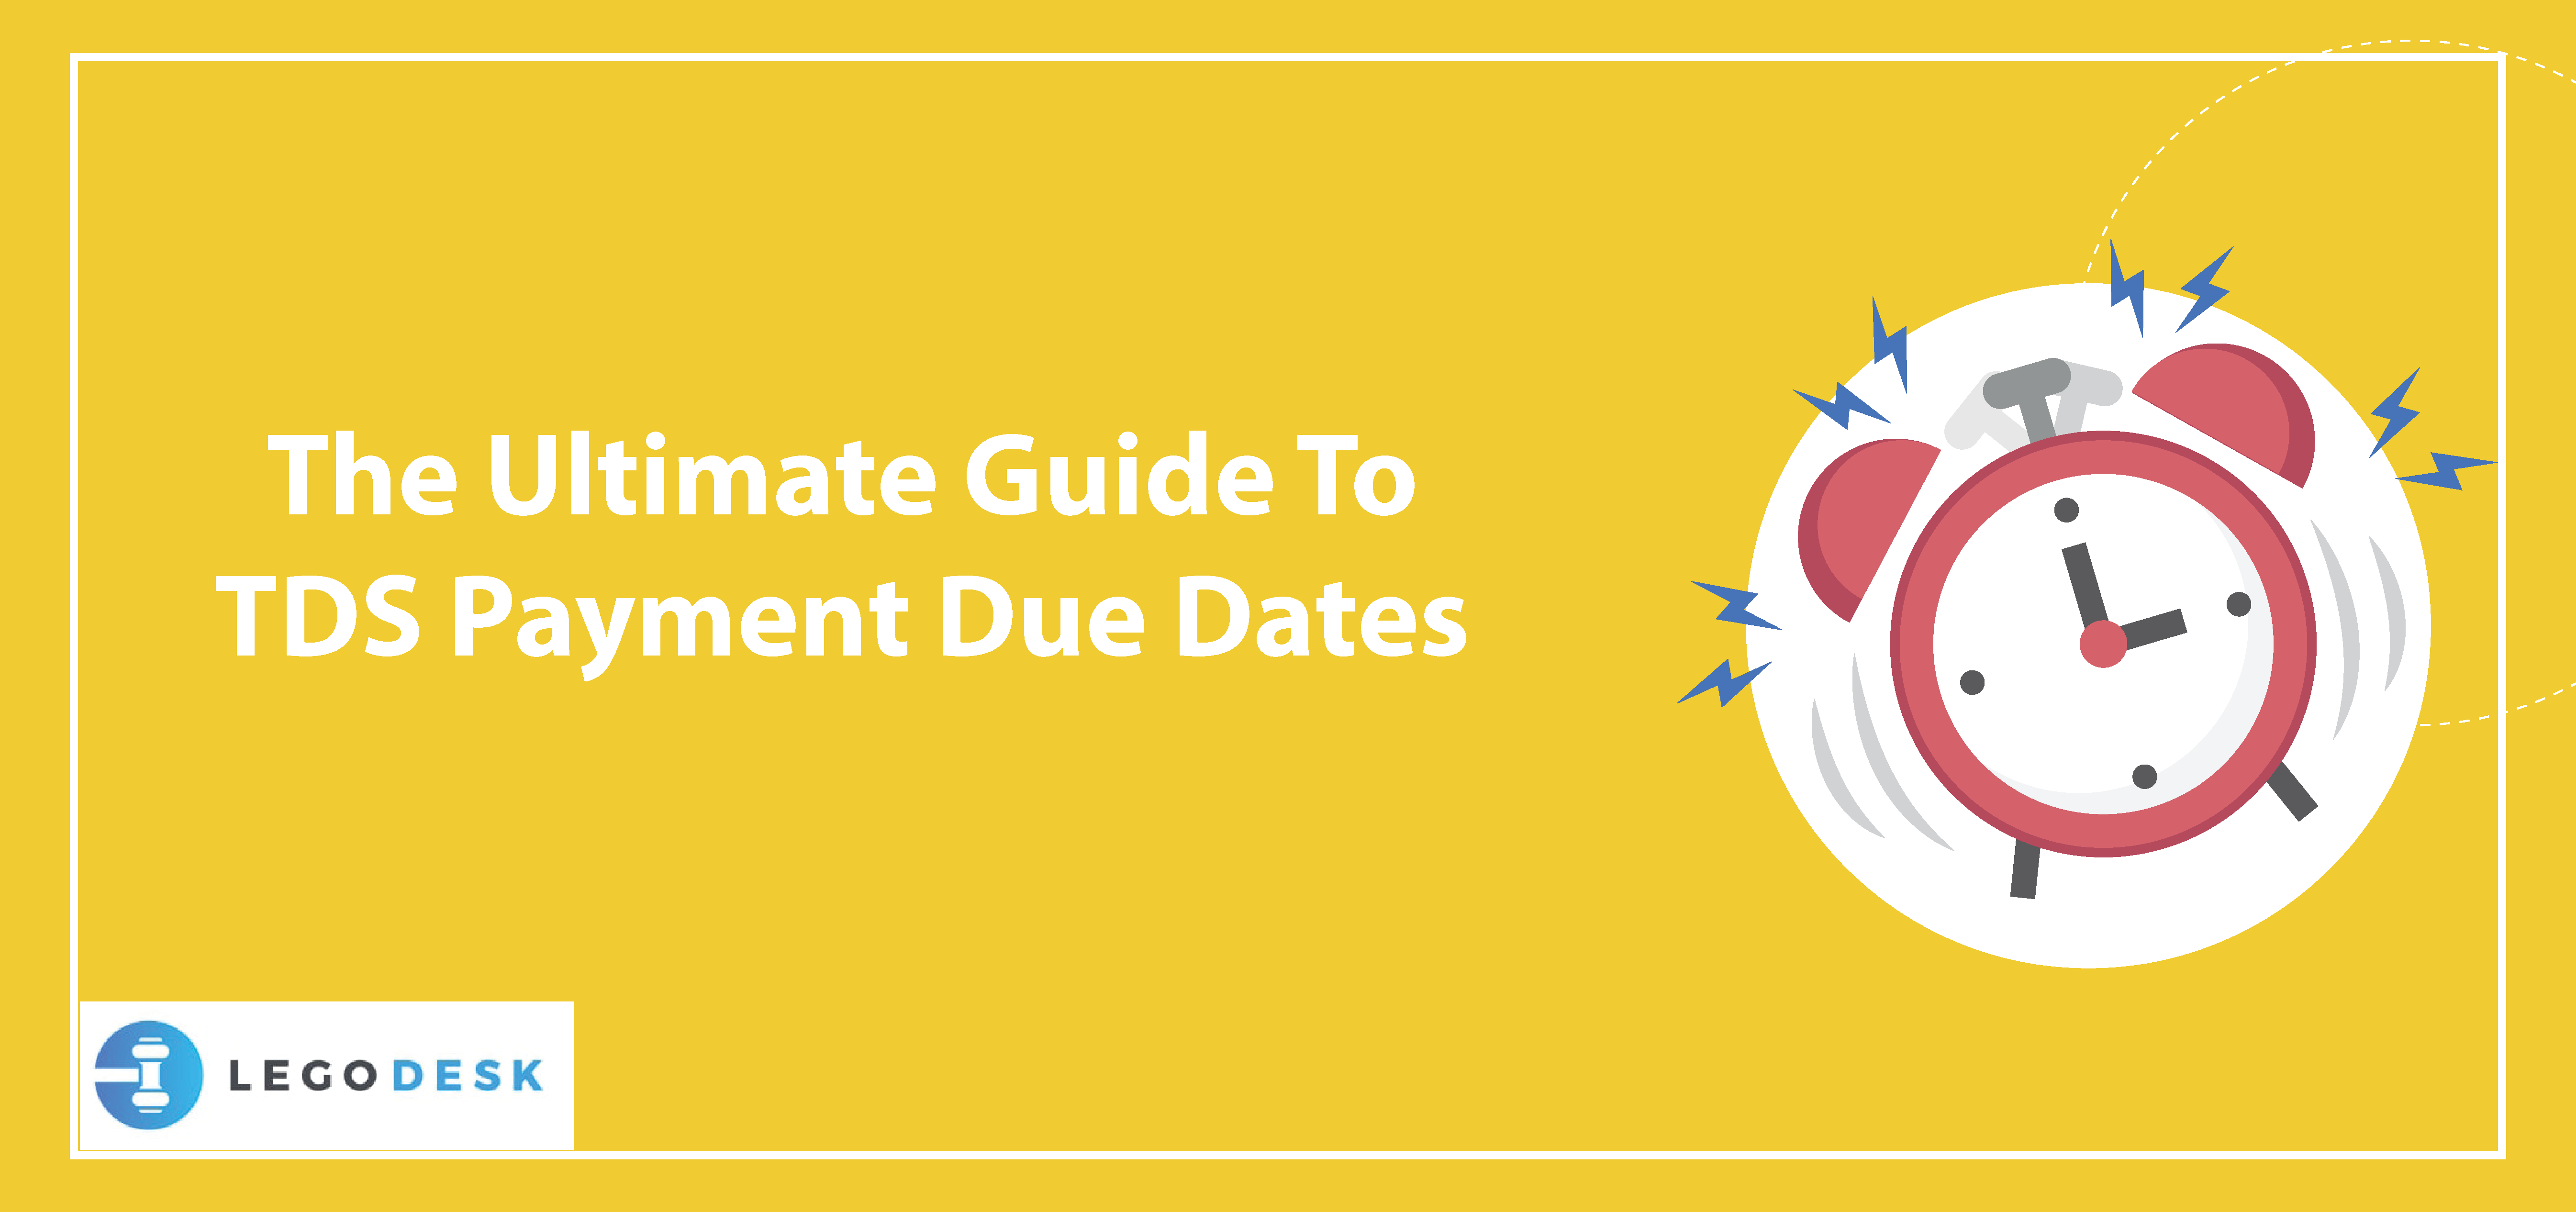 The Ultimate Guide To TDS Payment Due Dates